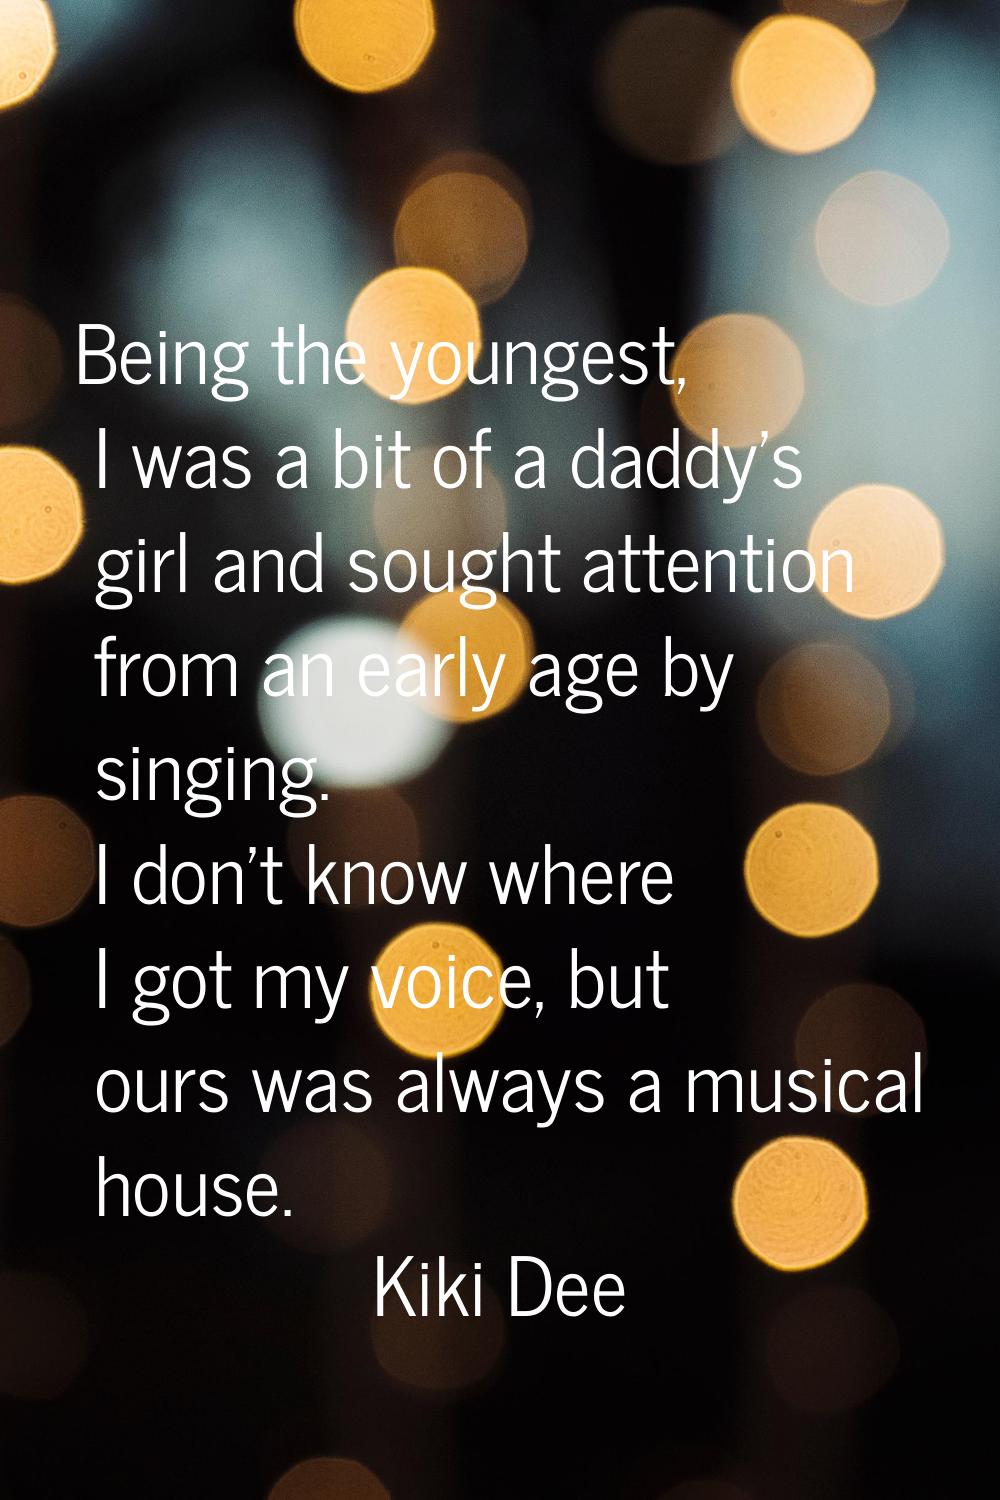 Being the youngest, I was a bit of a daddy's girl and sought attention from an early age by singing